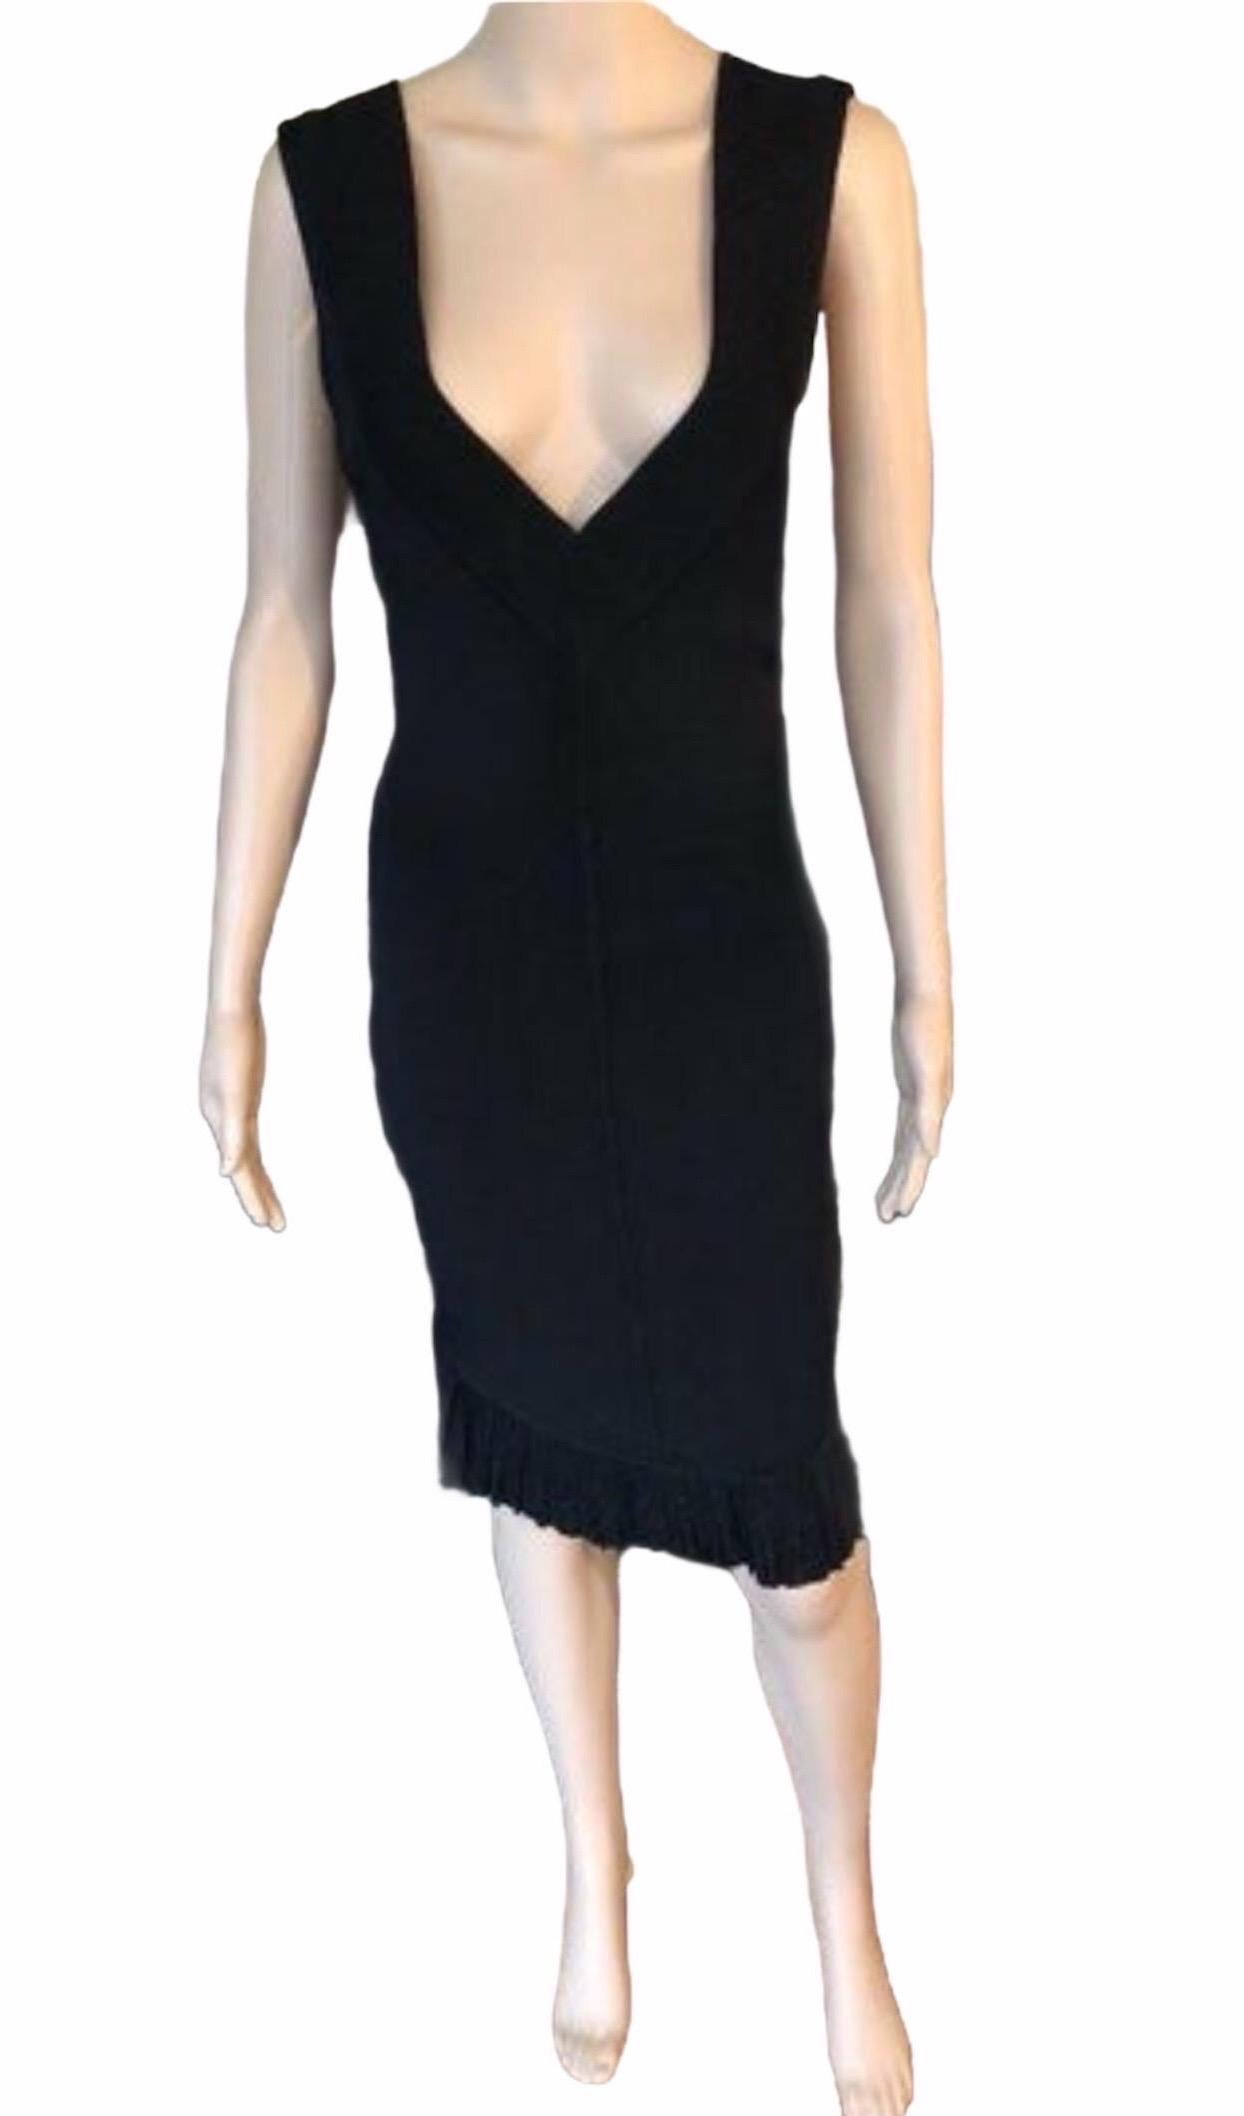 Azzedine Alaia S/S 1990 Vintage Fitted Plunged Décolleté Open Back Dress S

Black Alaia knit sleeveless mini dress with deep V neck and pleated accent hem.

All Eyes on Alaïa

For the last half-century, the world’s most fashionable and adventuresome